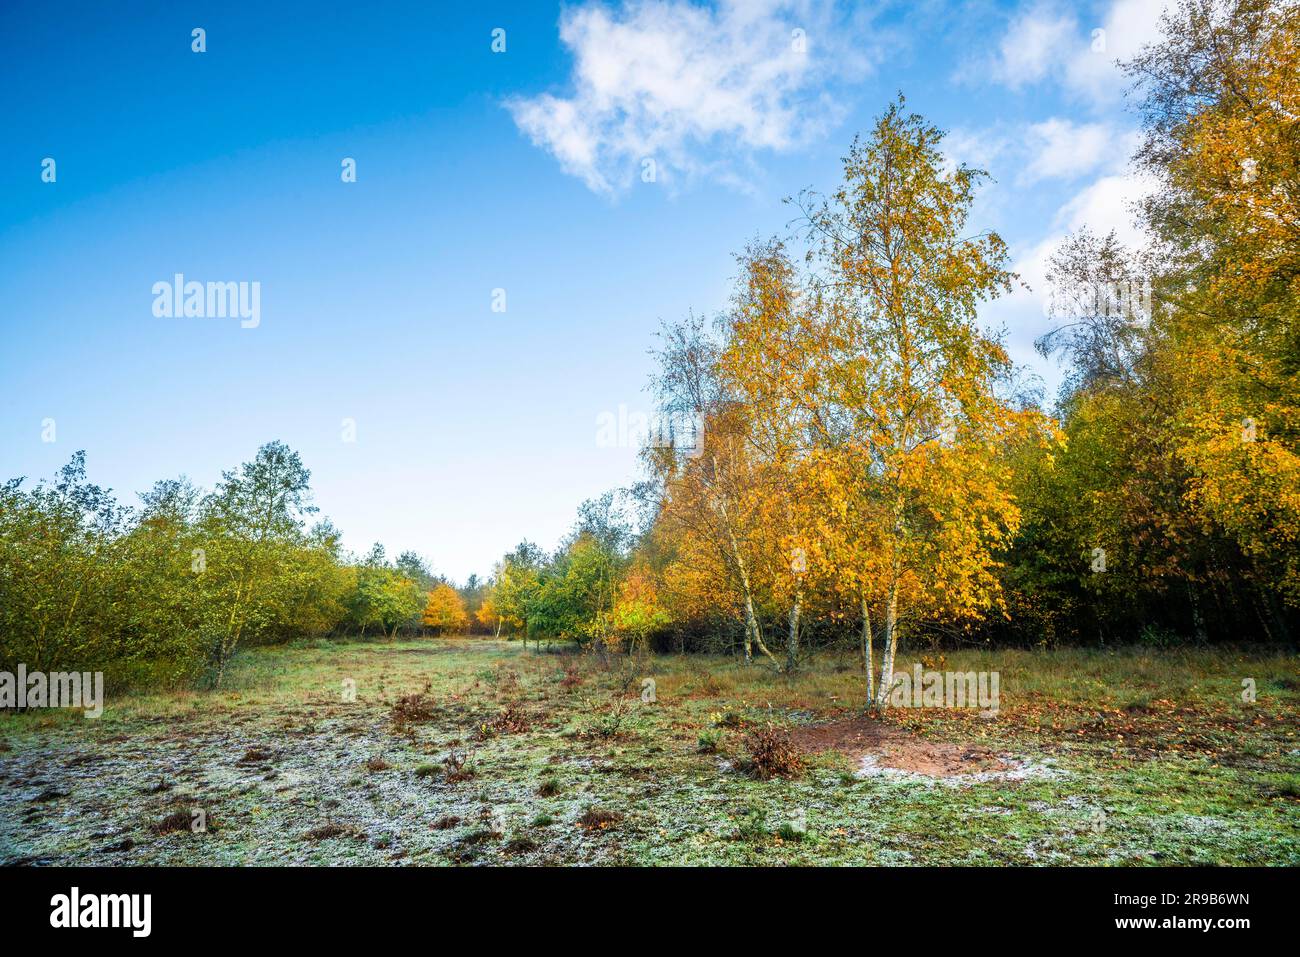 Autumn colors on birch trees under a blue sky in the fall in beautiful yellow colors Stock Photo